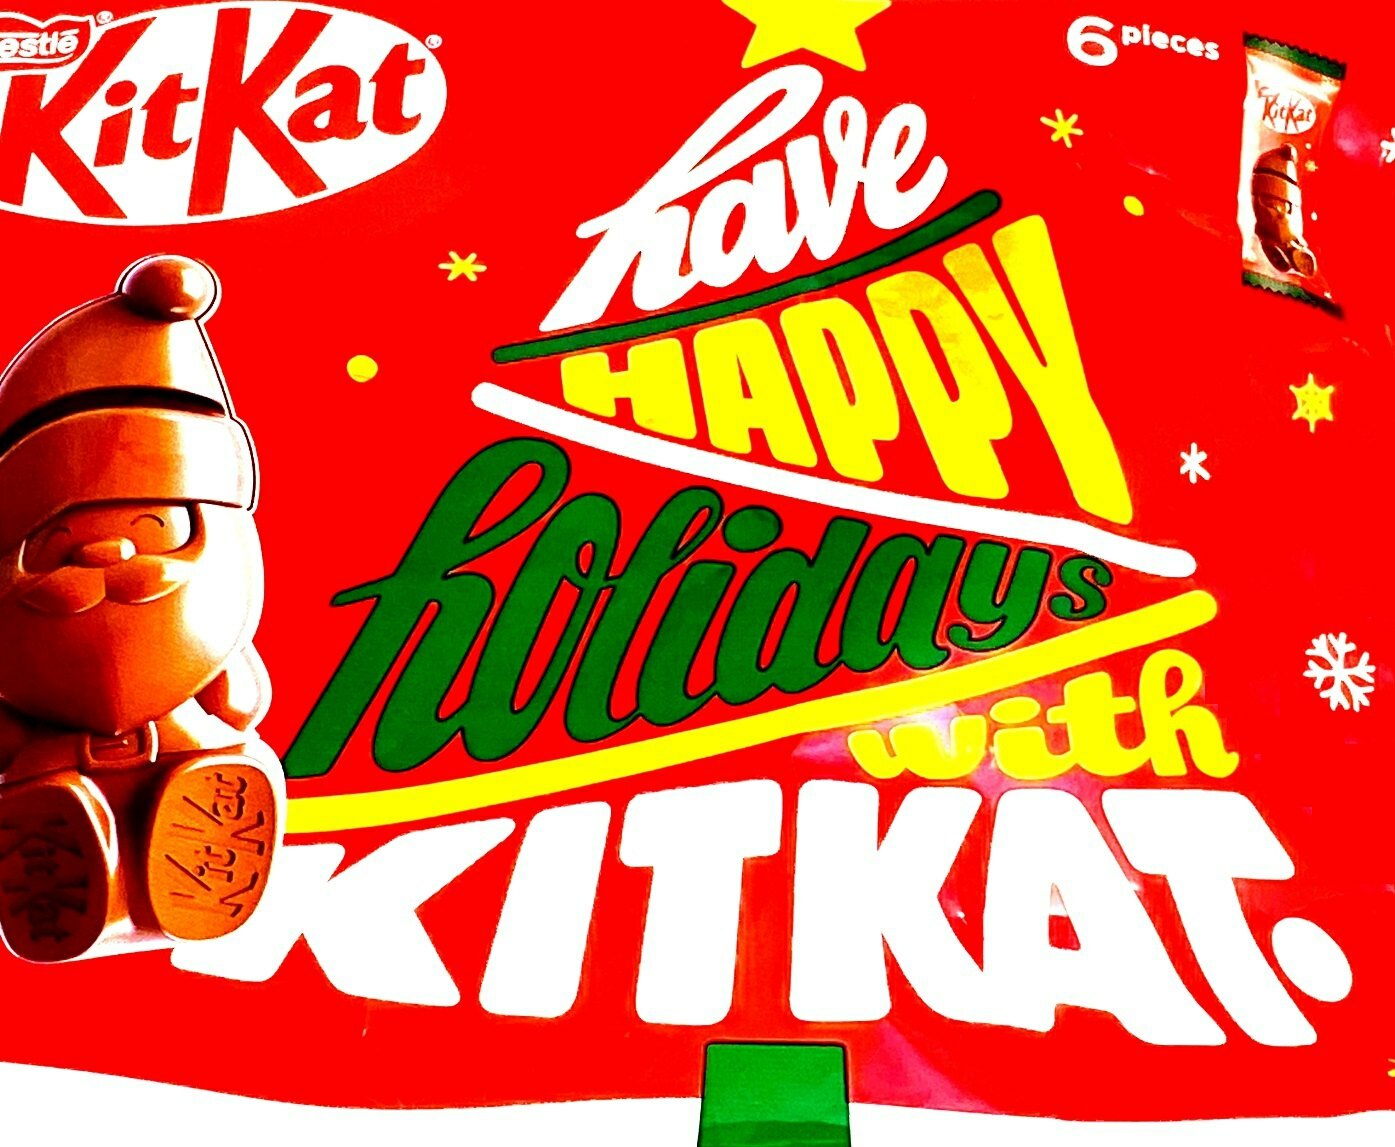 Have Happy Holidays with KitKat.